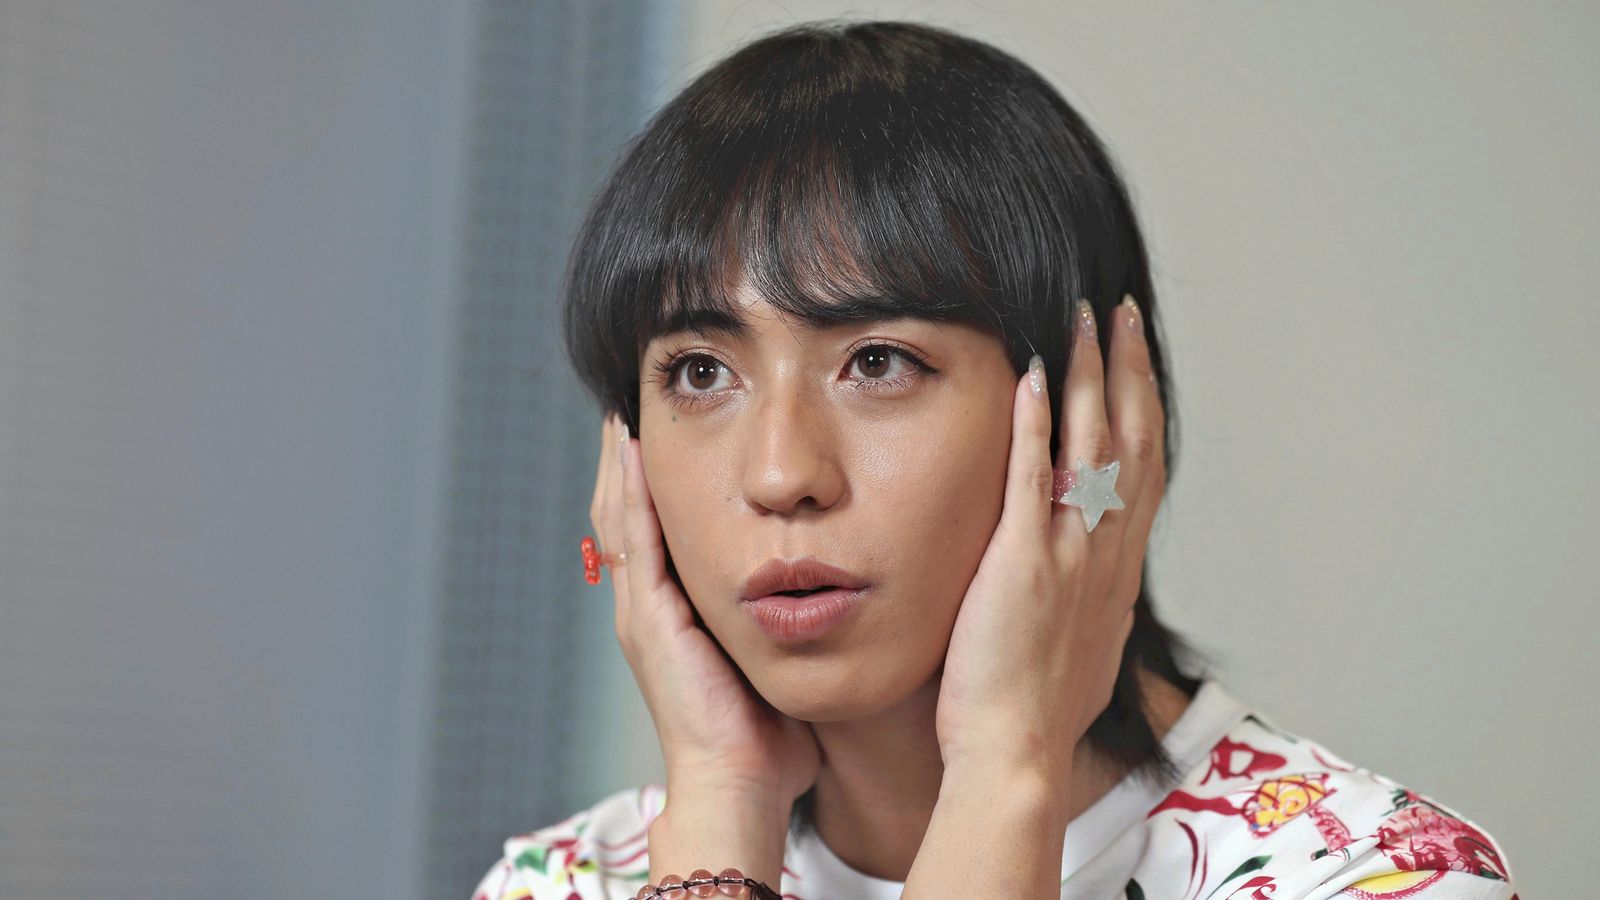 Ryuchell: Japanese TV personality and LGBT influencer found dead at agent's office aged 27